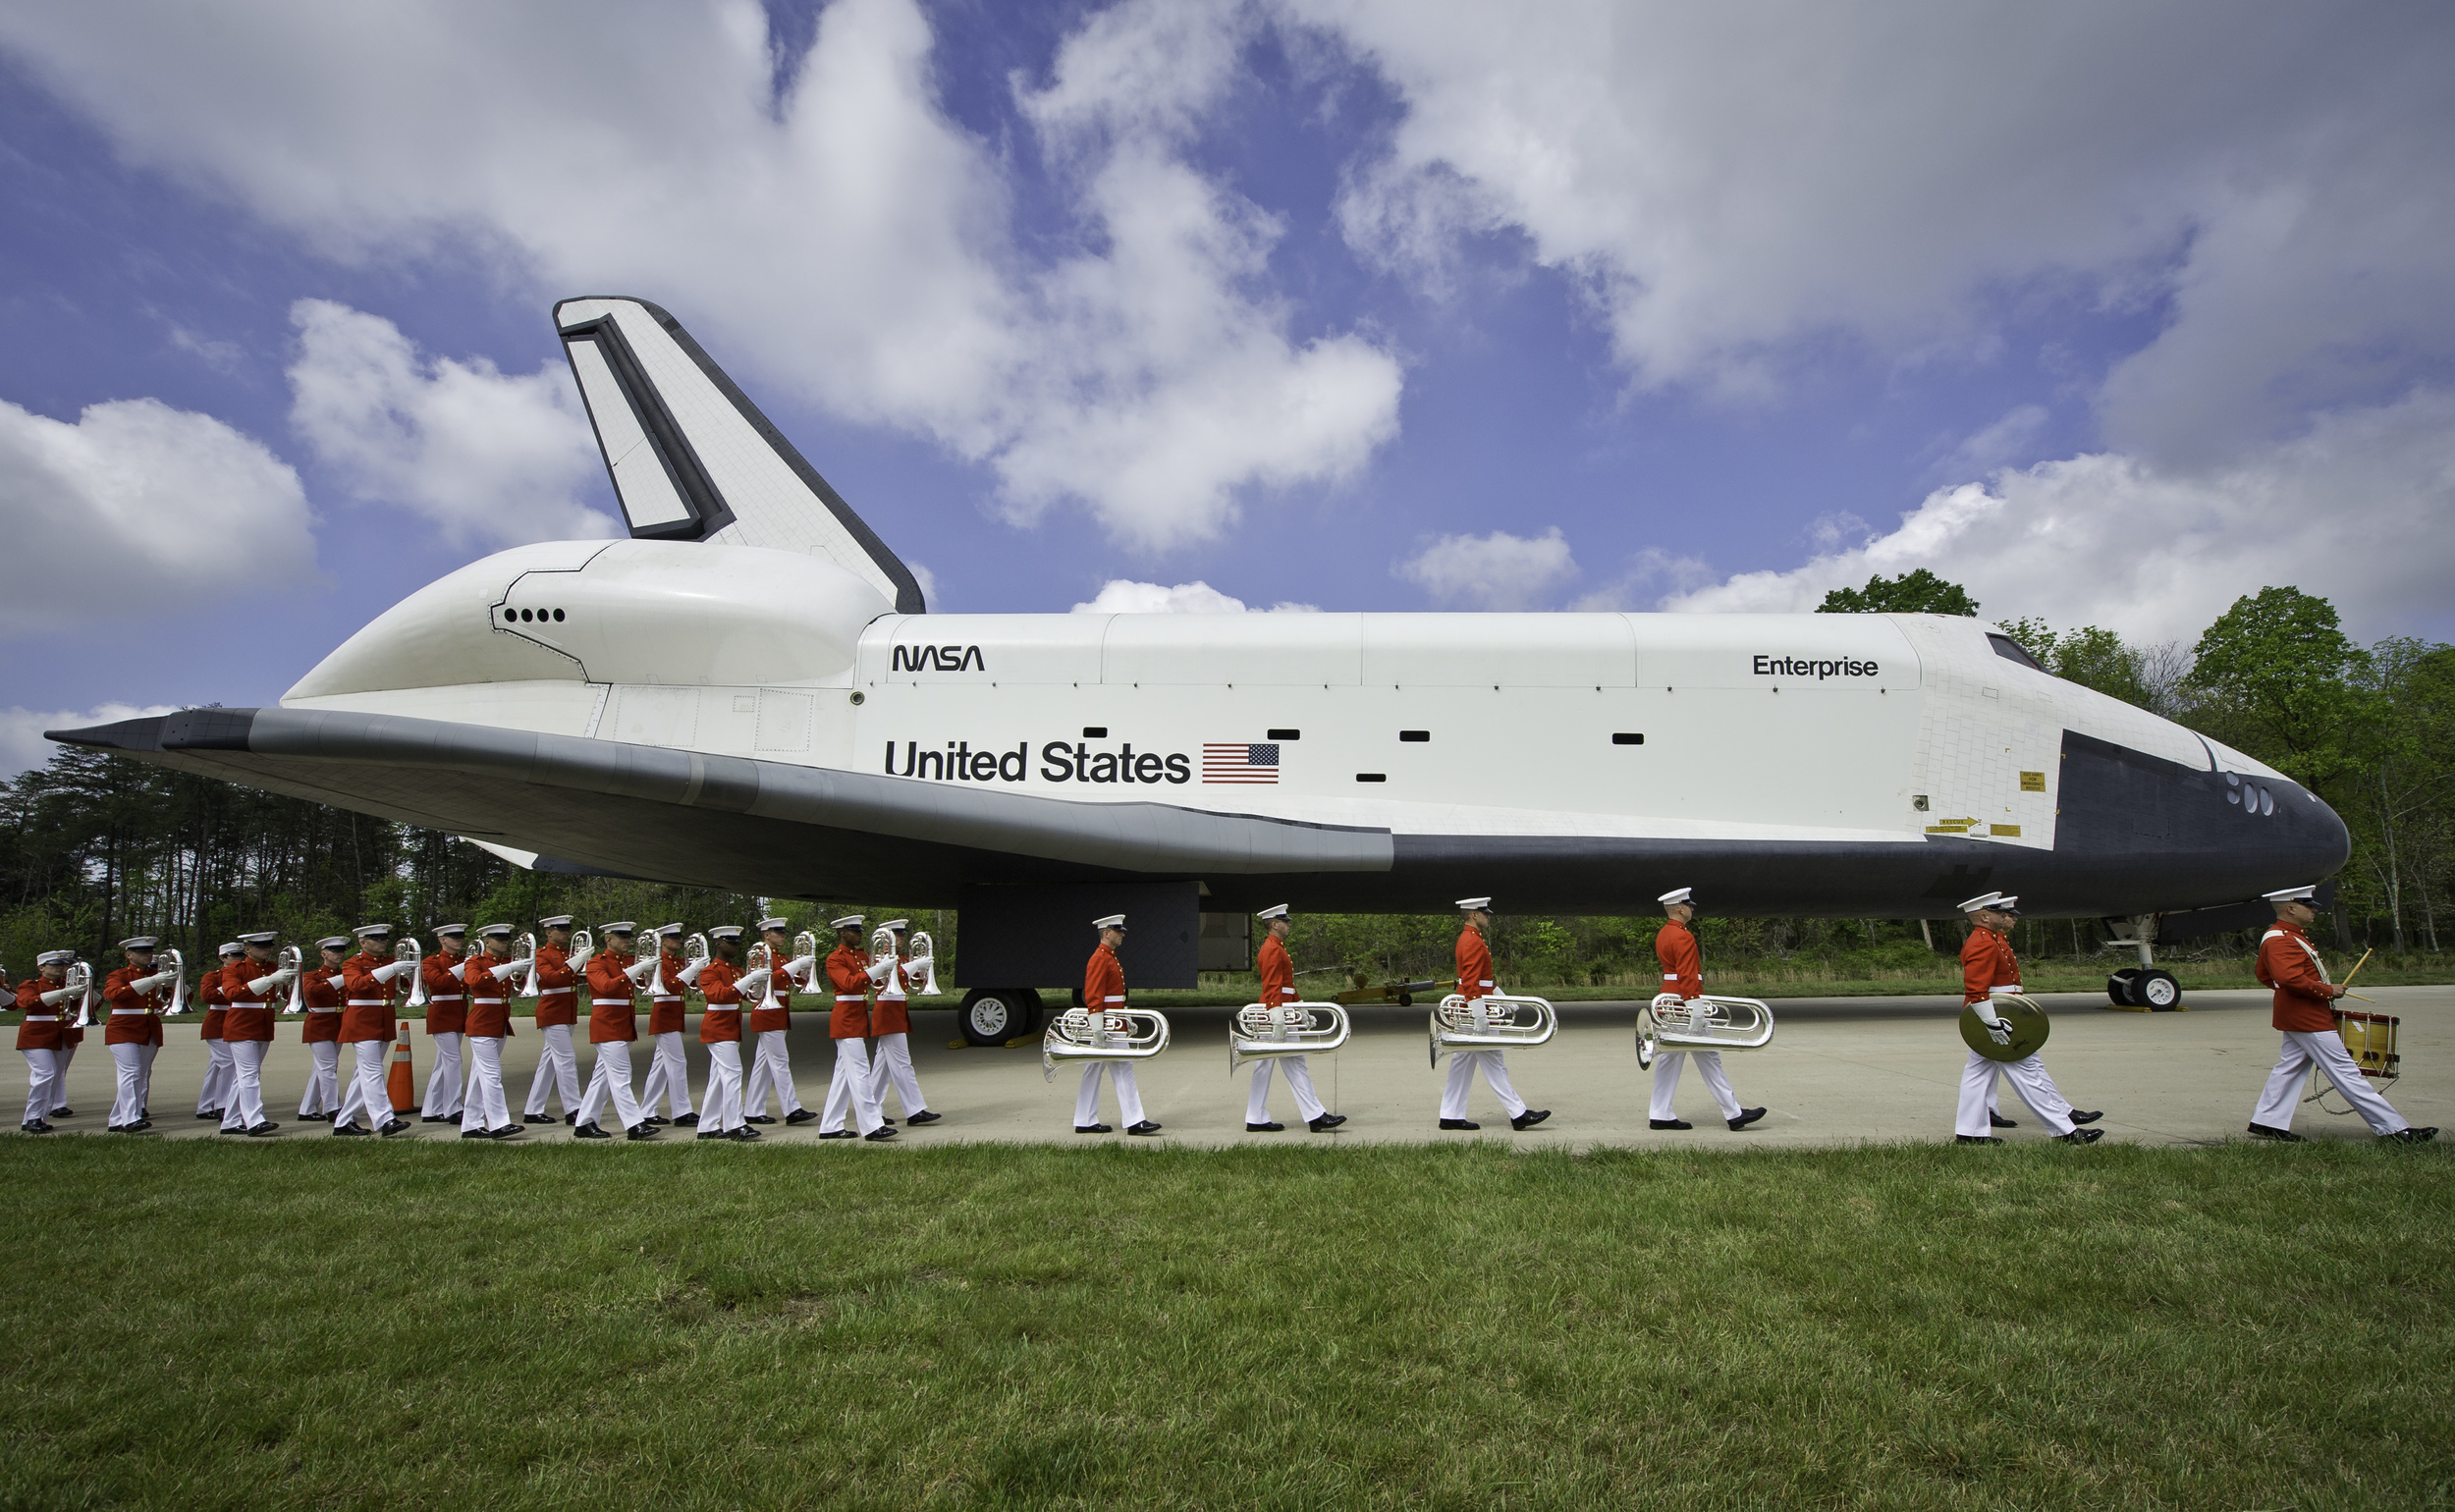  Space shuttle Enterprise is seen as the United States Marine Corp Drum and Bugle Corps and Color Guard march by at the Steven F. Udvar-Hazy Center Thursday, April 19, 2012 in Chantilly, Va. Enterprise was the first space shuttle orbiter, built for N